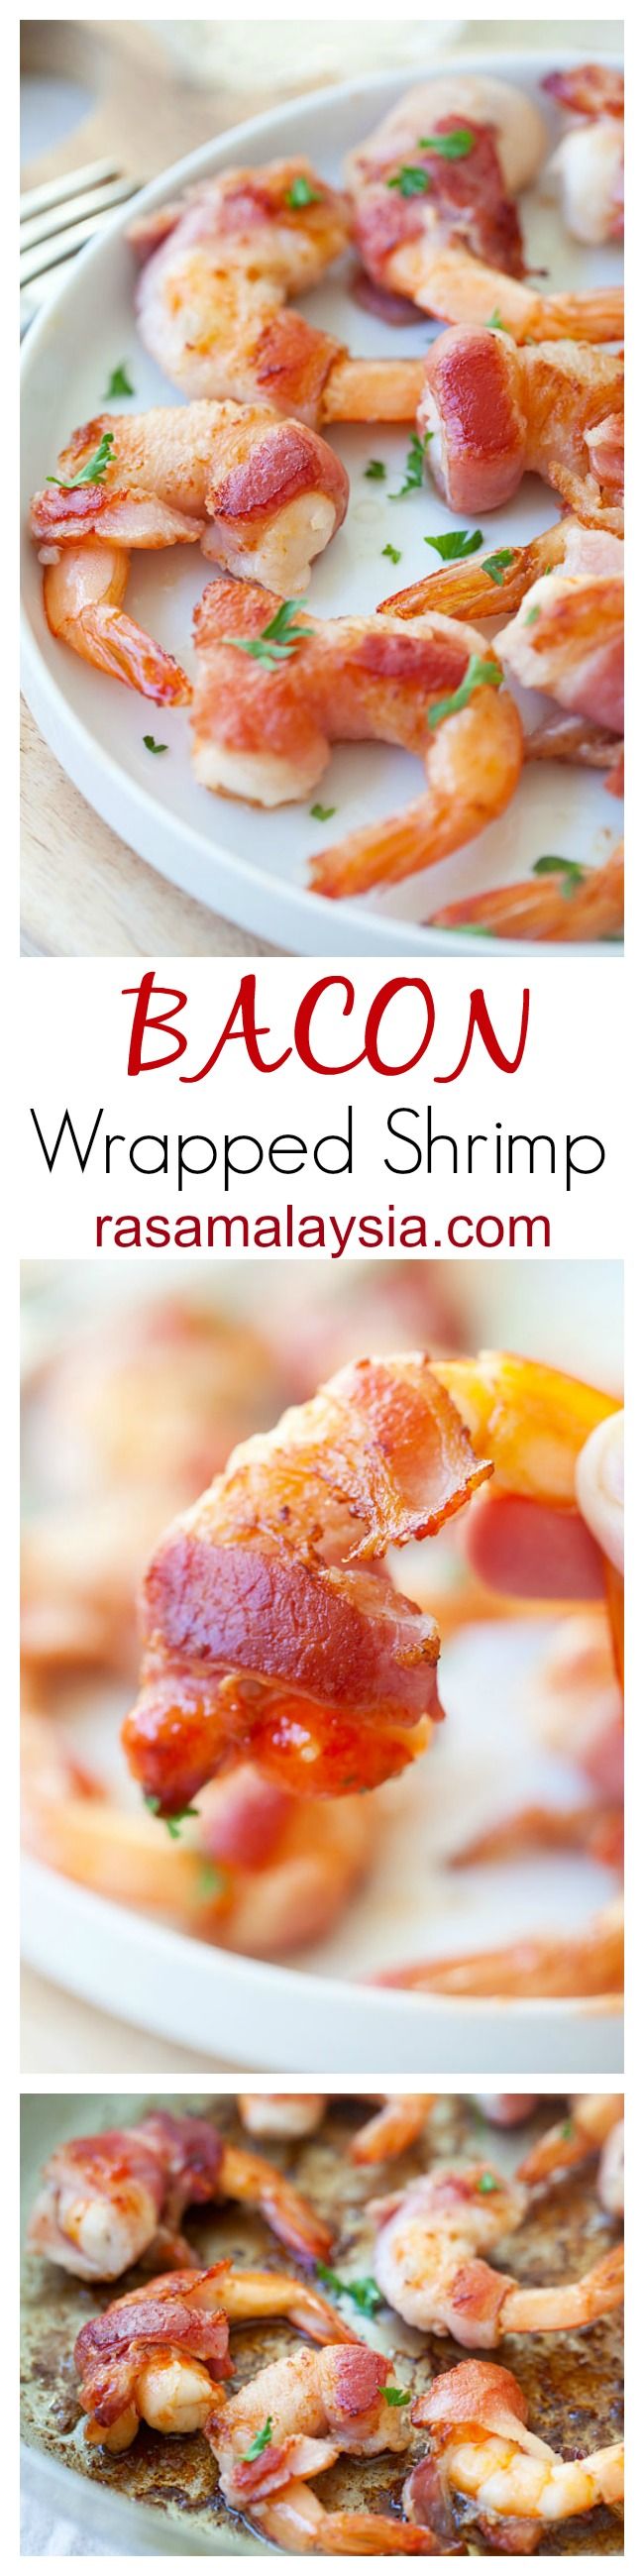 Bacon-Wrapped Shrimp is an easy recipe of wrapping shrimp with bacon and then pan-fried or grilled. This bacon-wrapped shrimp recipe is a crowd pleaser | rasamalaysia.com